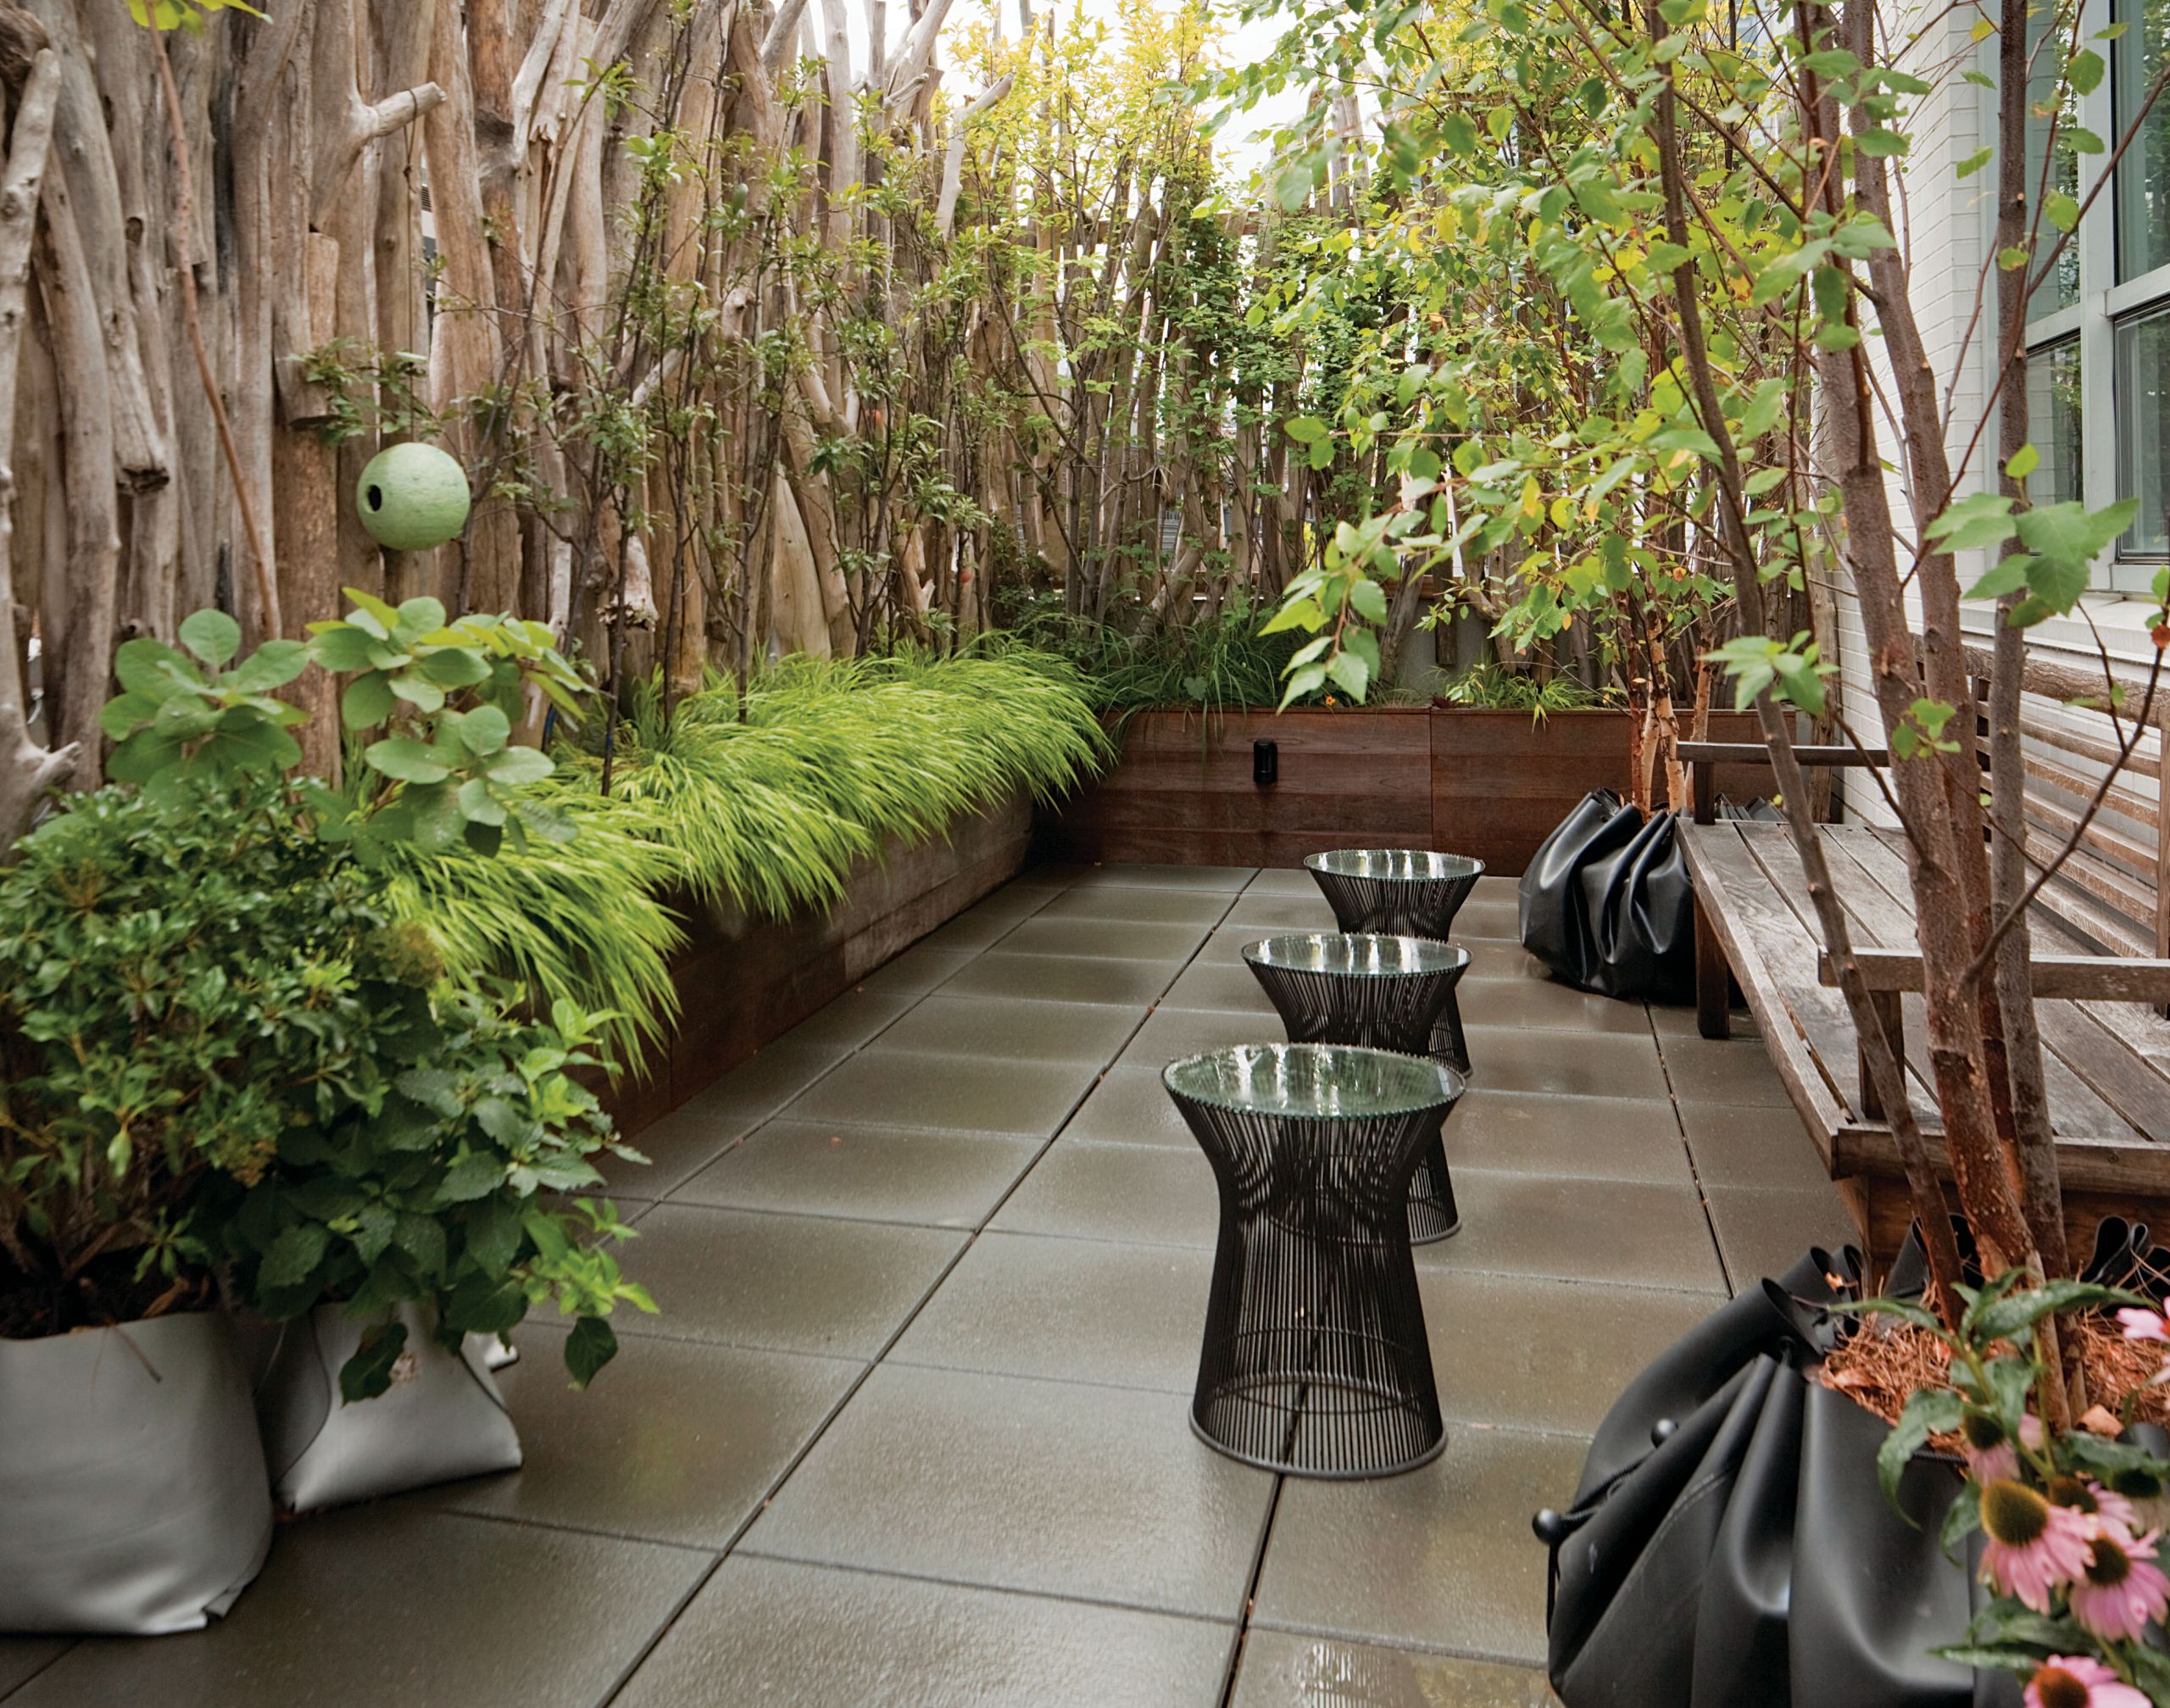 Terrace Landscape With Trees
 New Book Highlights Amazing Manhattan Rooftop Terraces and